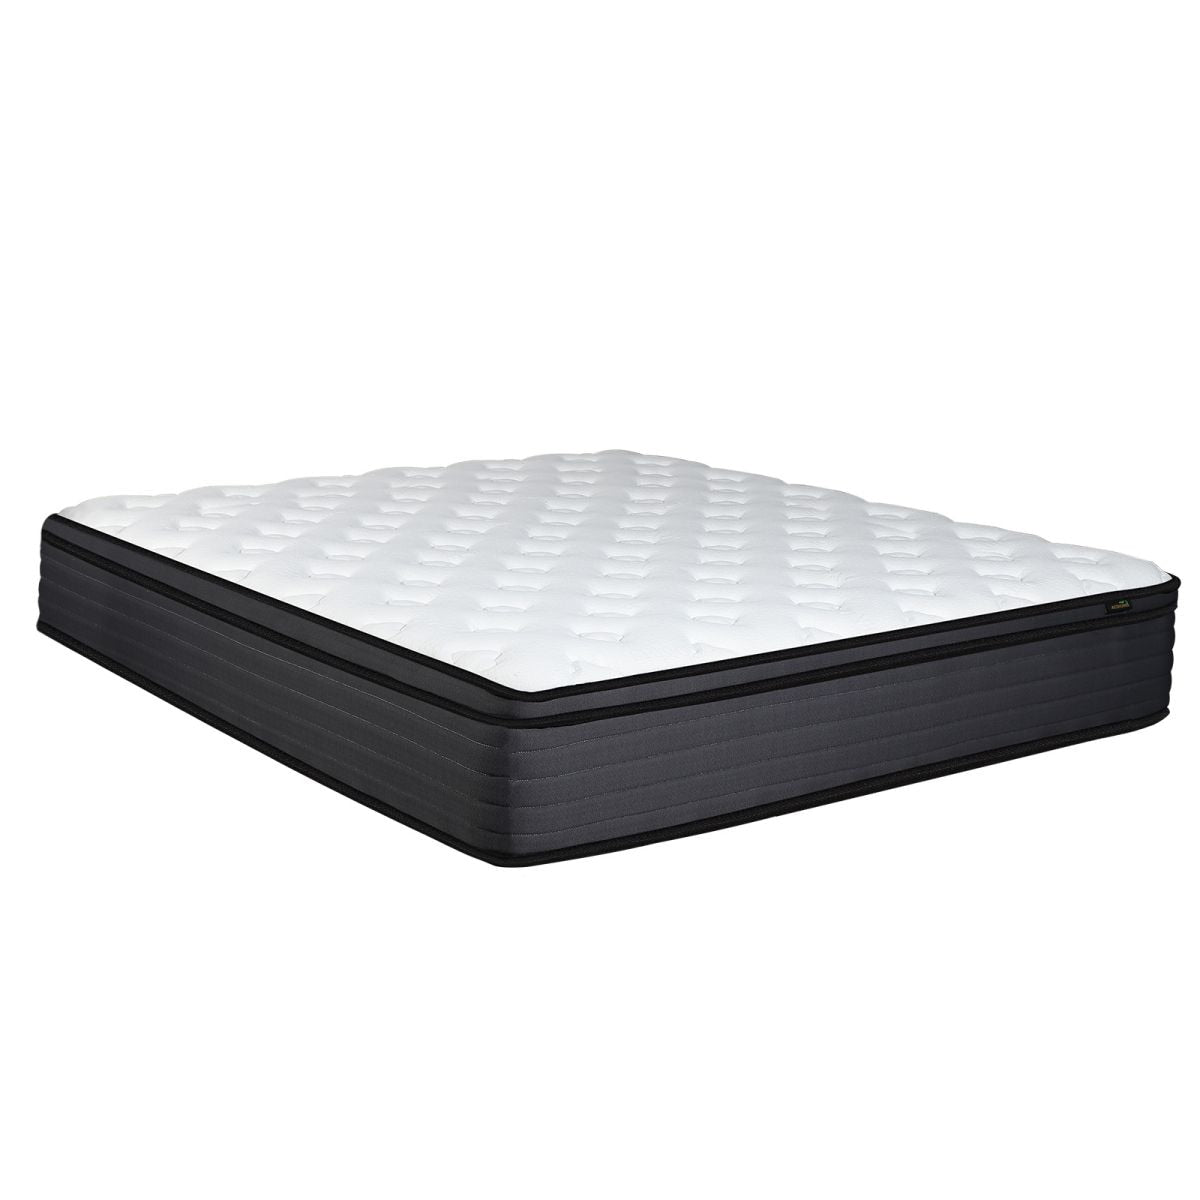 Aicehome Hybrid Mattress High Density Foam Individually Wrapped Pocket Coils Mattresses Motion Isolation Medium Firm